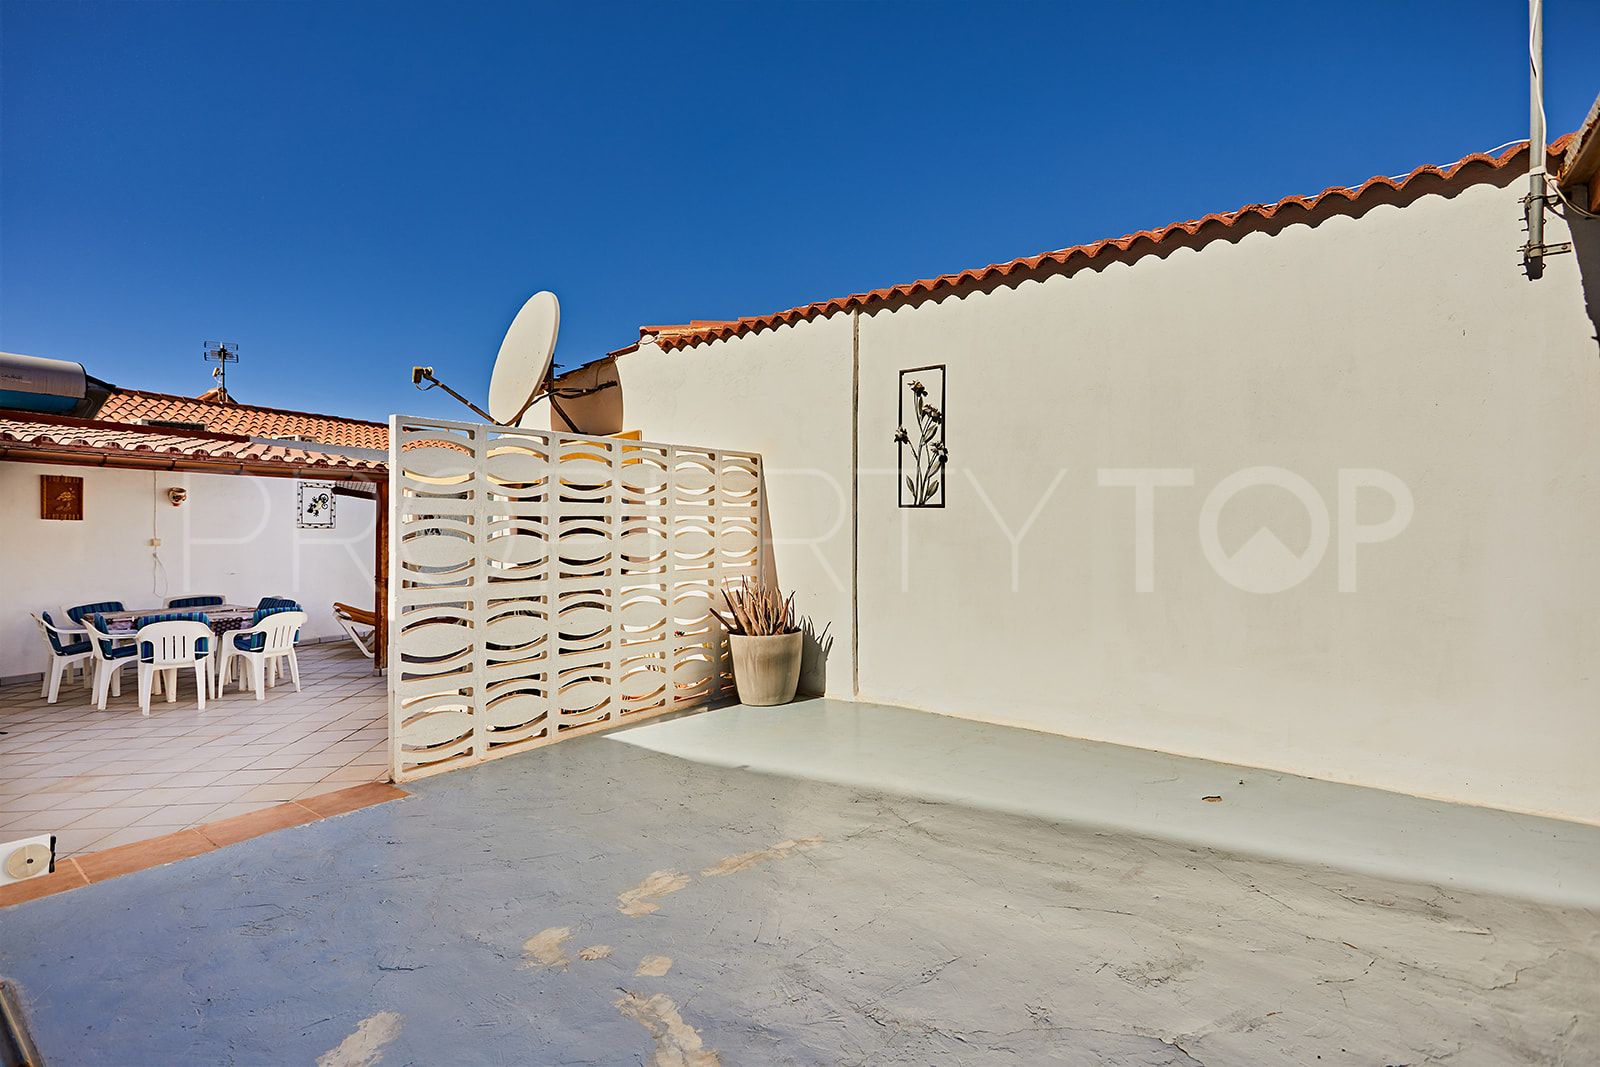 4 bedrooms house for sale in Tauro-Playa del Cura